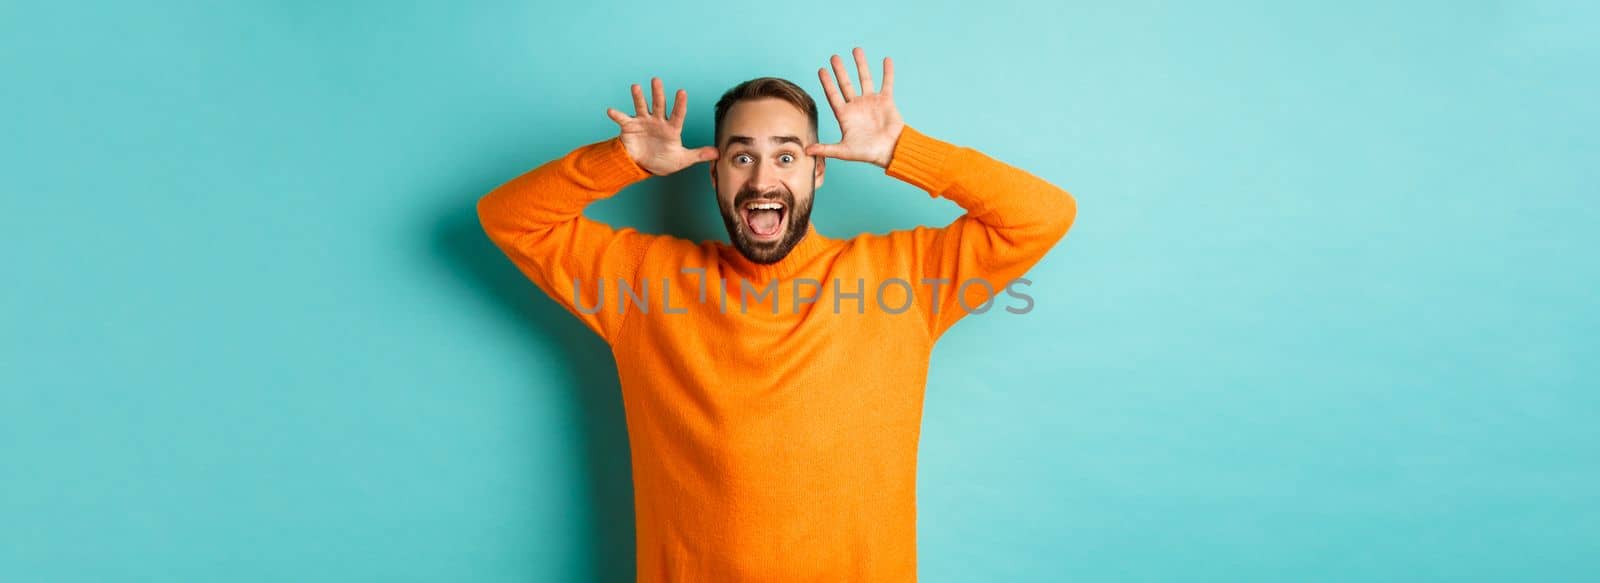 Image of handsome caucasian man making funny faces, mocking someone and smiling, standing against light blue background.